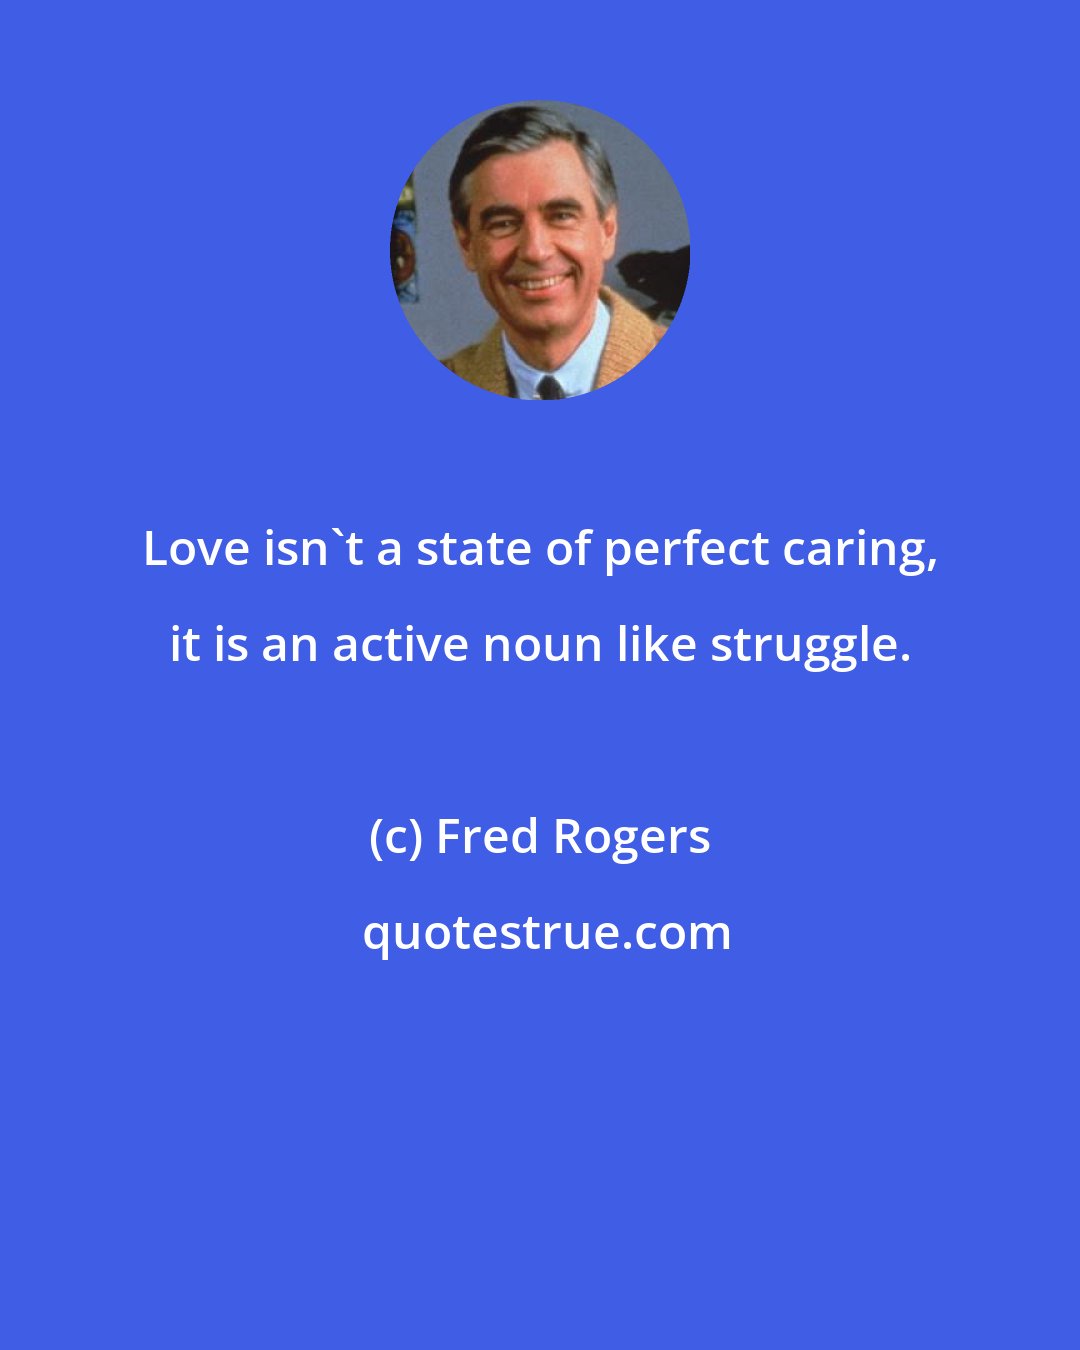 Fred Rogers: Love isn't a state of perfect caring, it is an active noun like struggle.